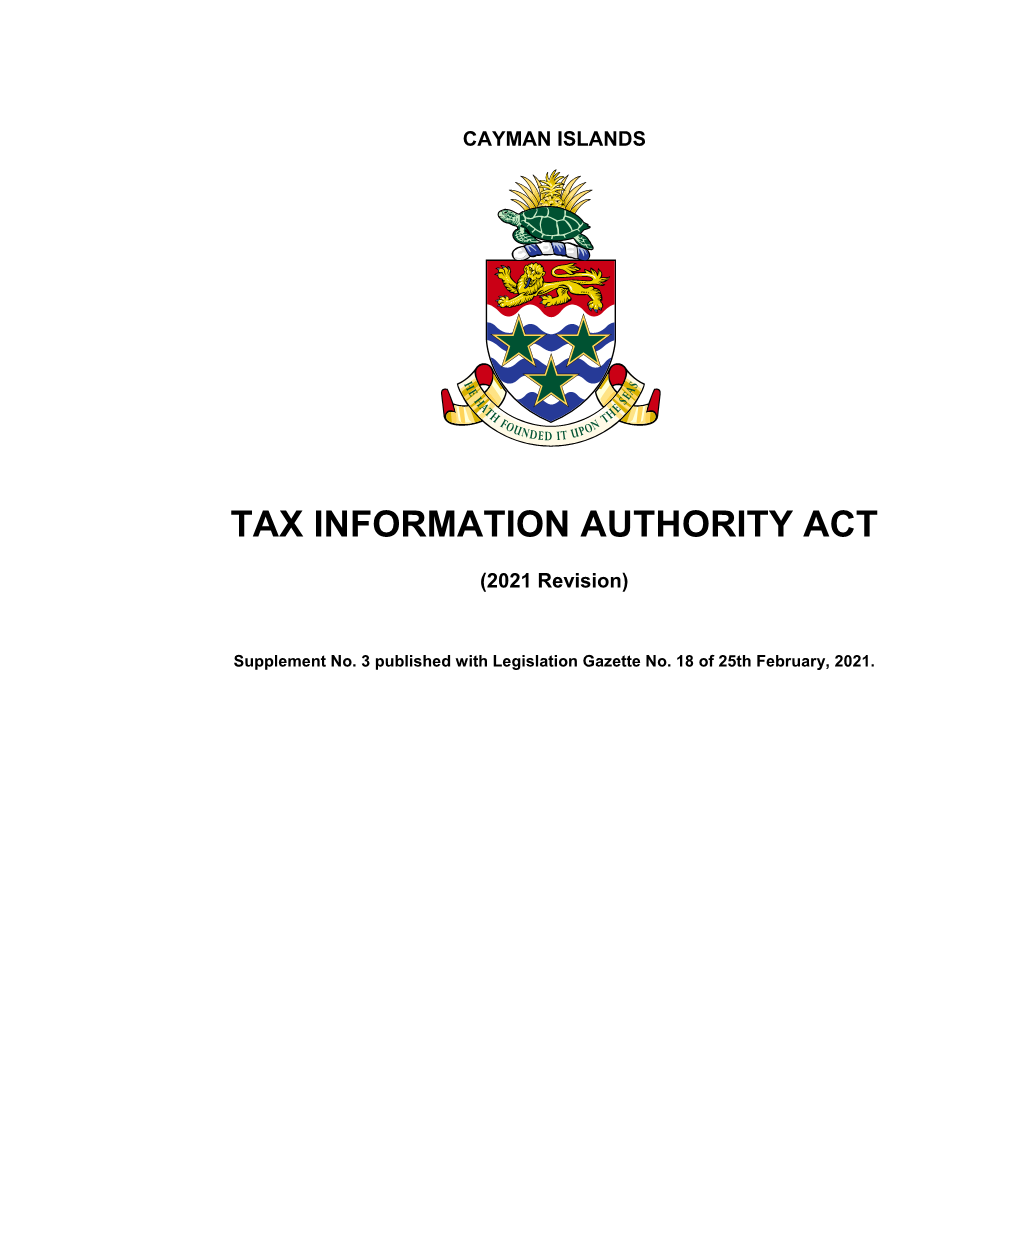 Tax Information Authority Act (2021 Revision) Publication Details Continued